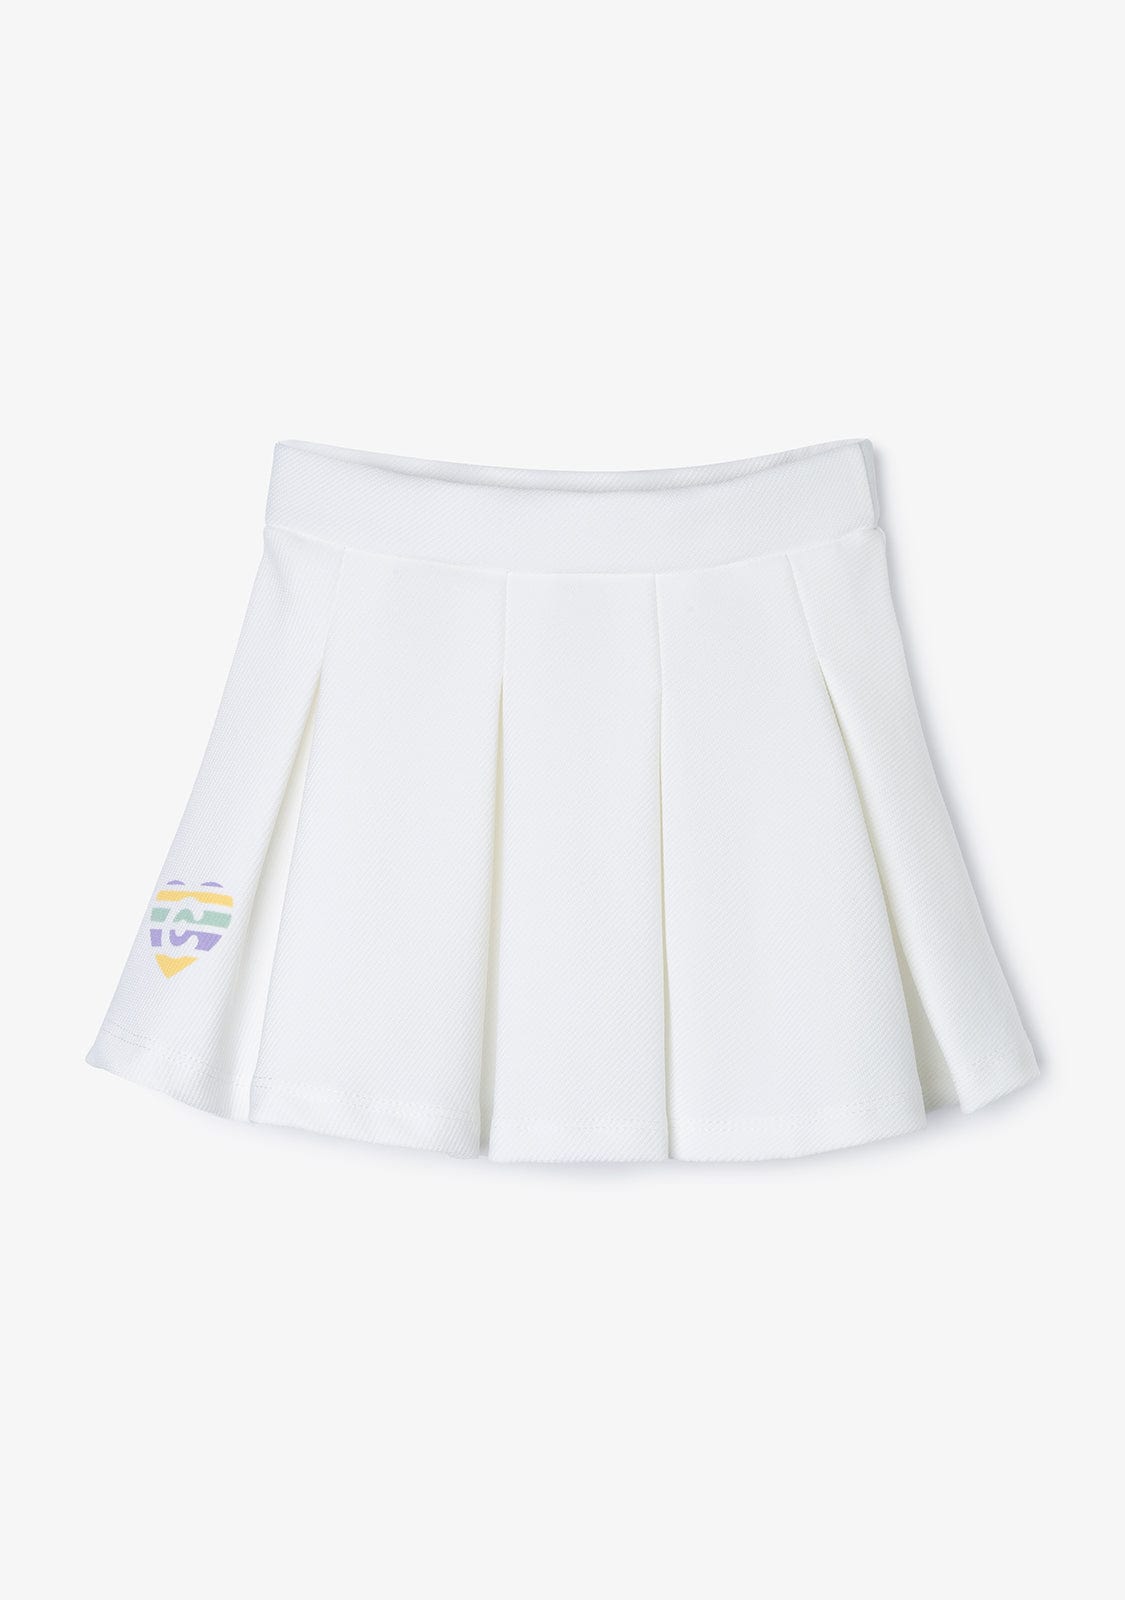 CONGUITOS TEXTIL Clothing Girl's White Box Pleat Skirt